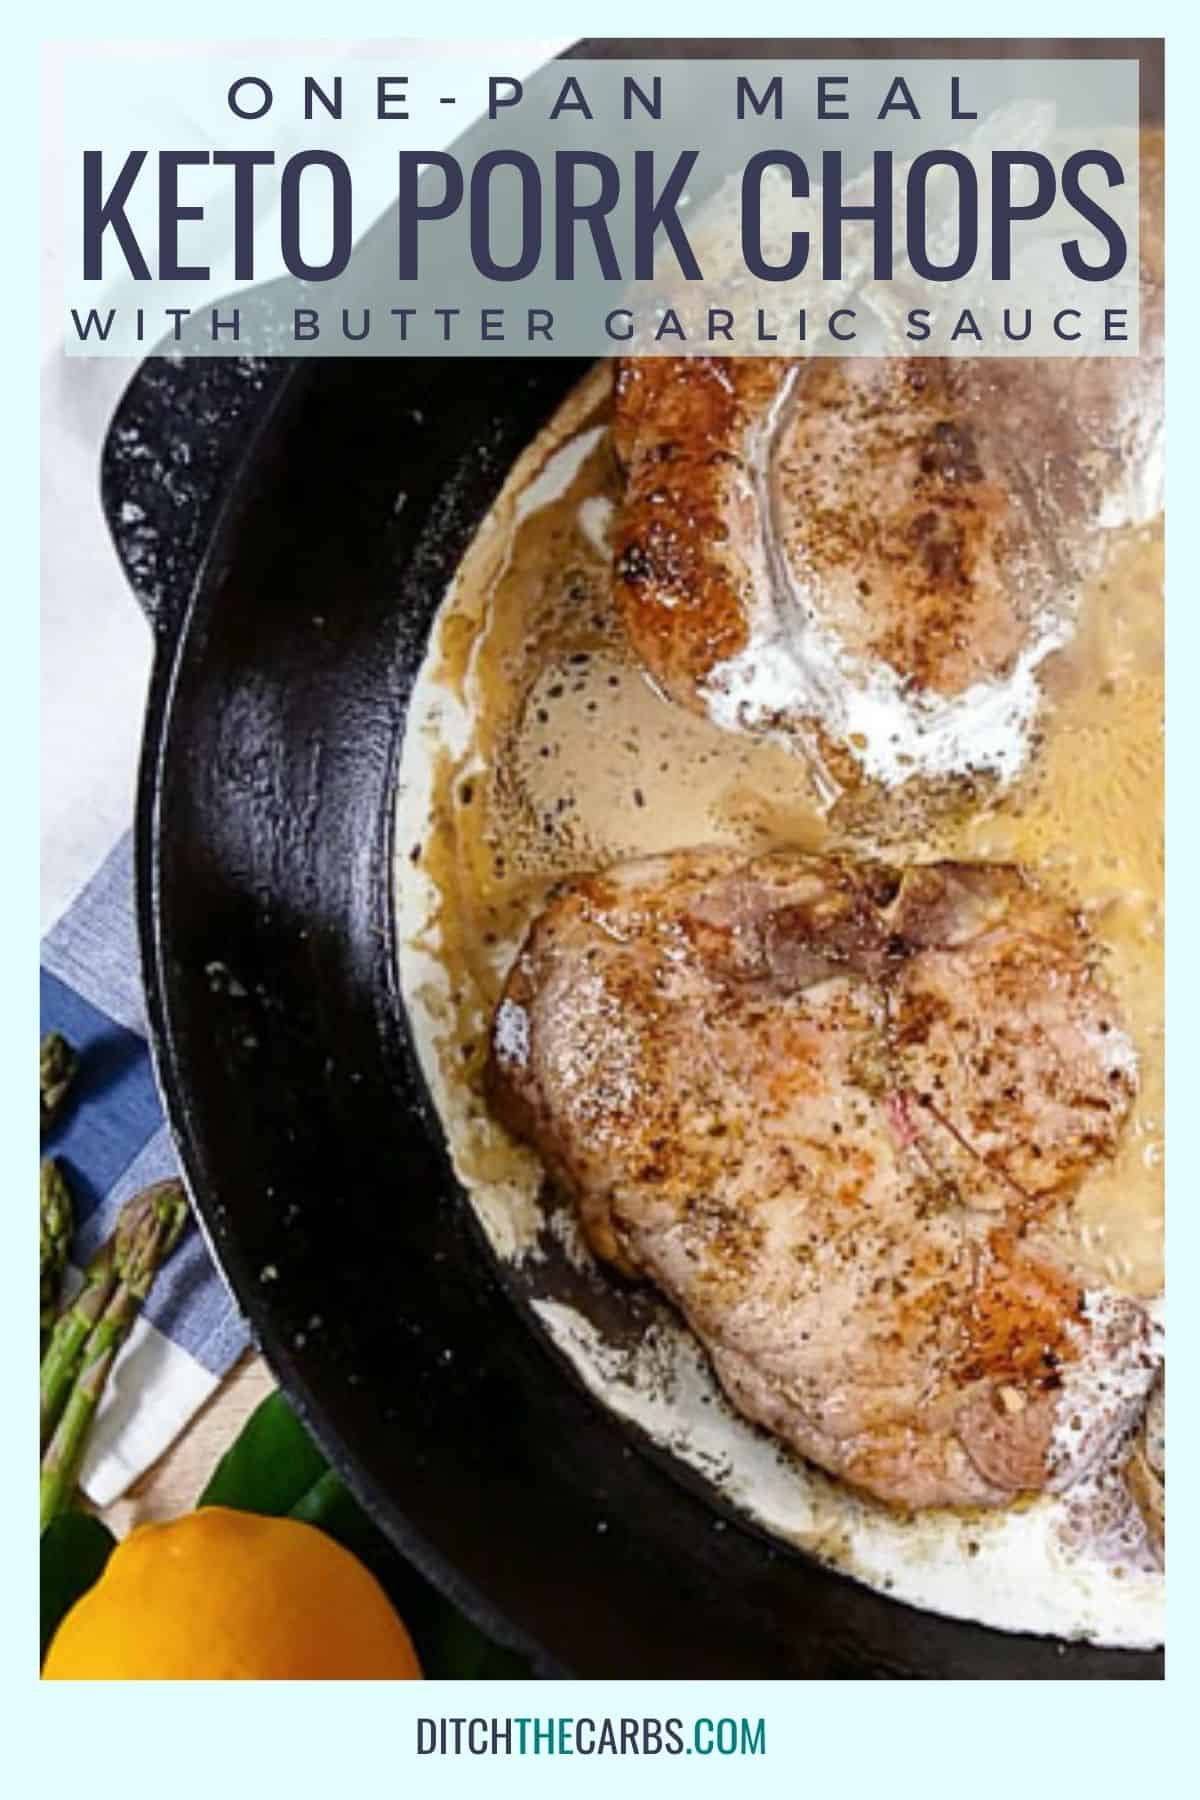 cooked pork chop recipe served with garlic butter on a white plate with asparagus